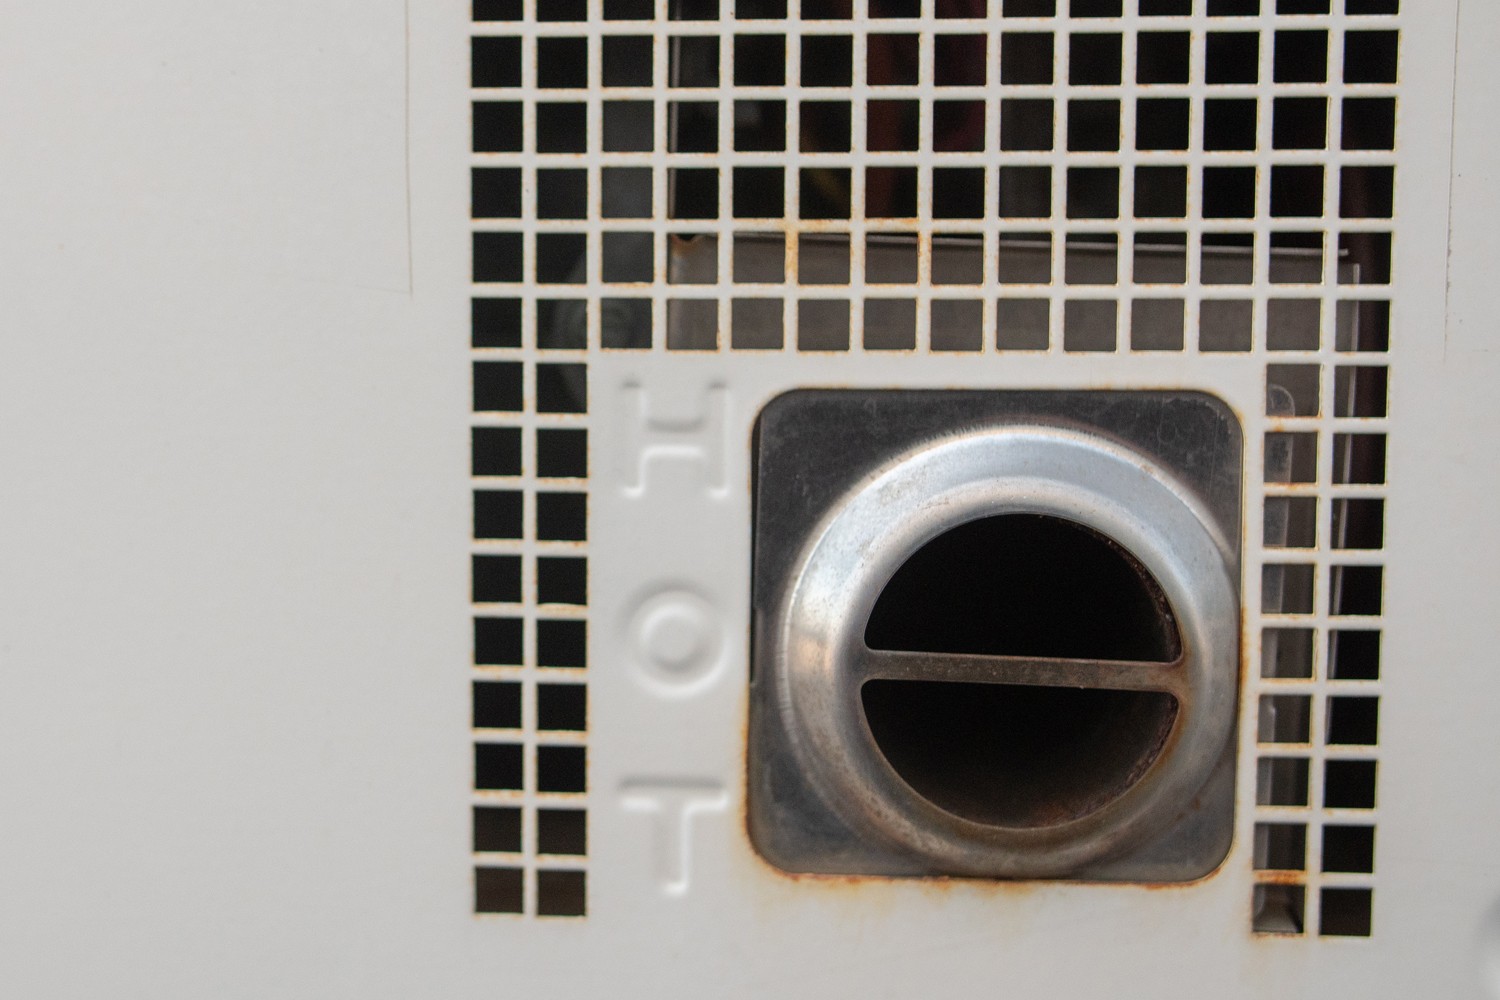 Hot letters on a RV Water Heater Vent